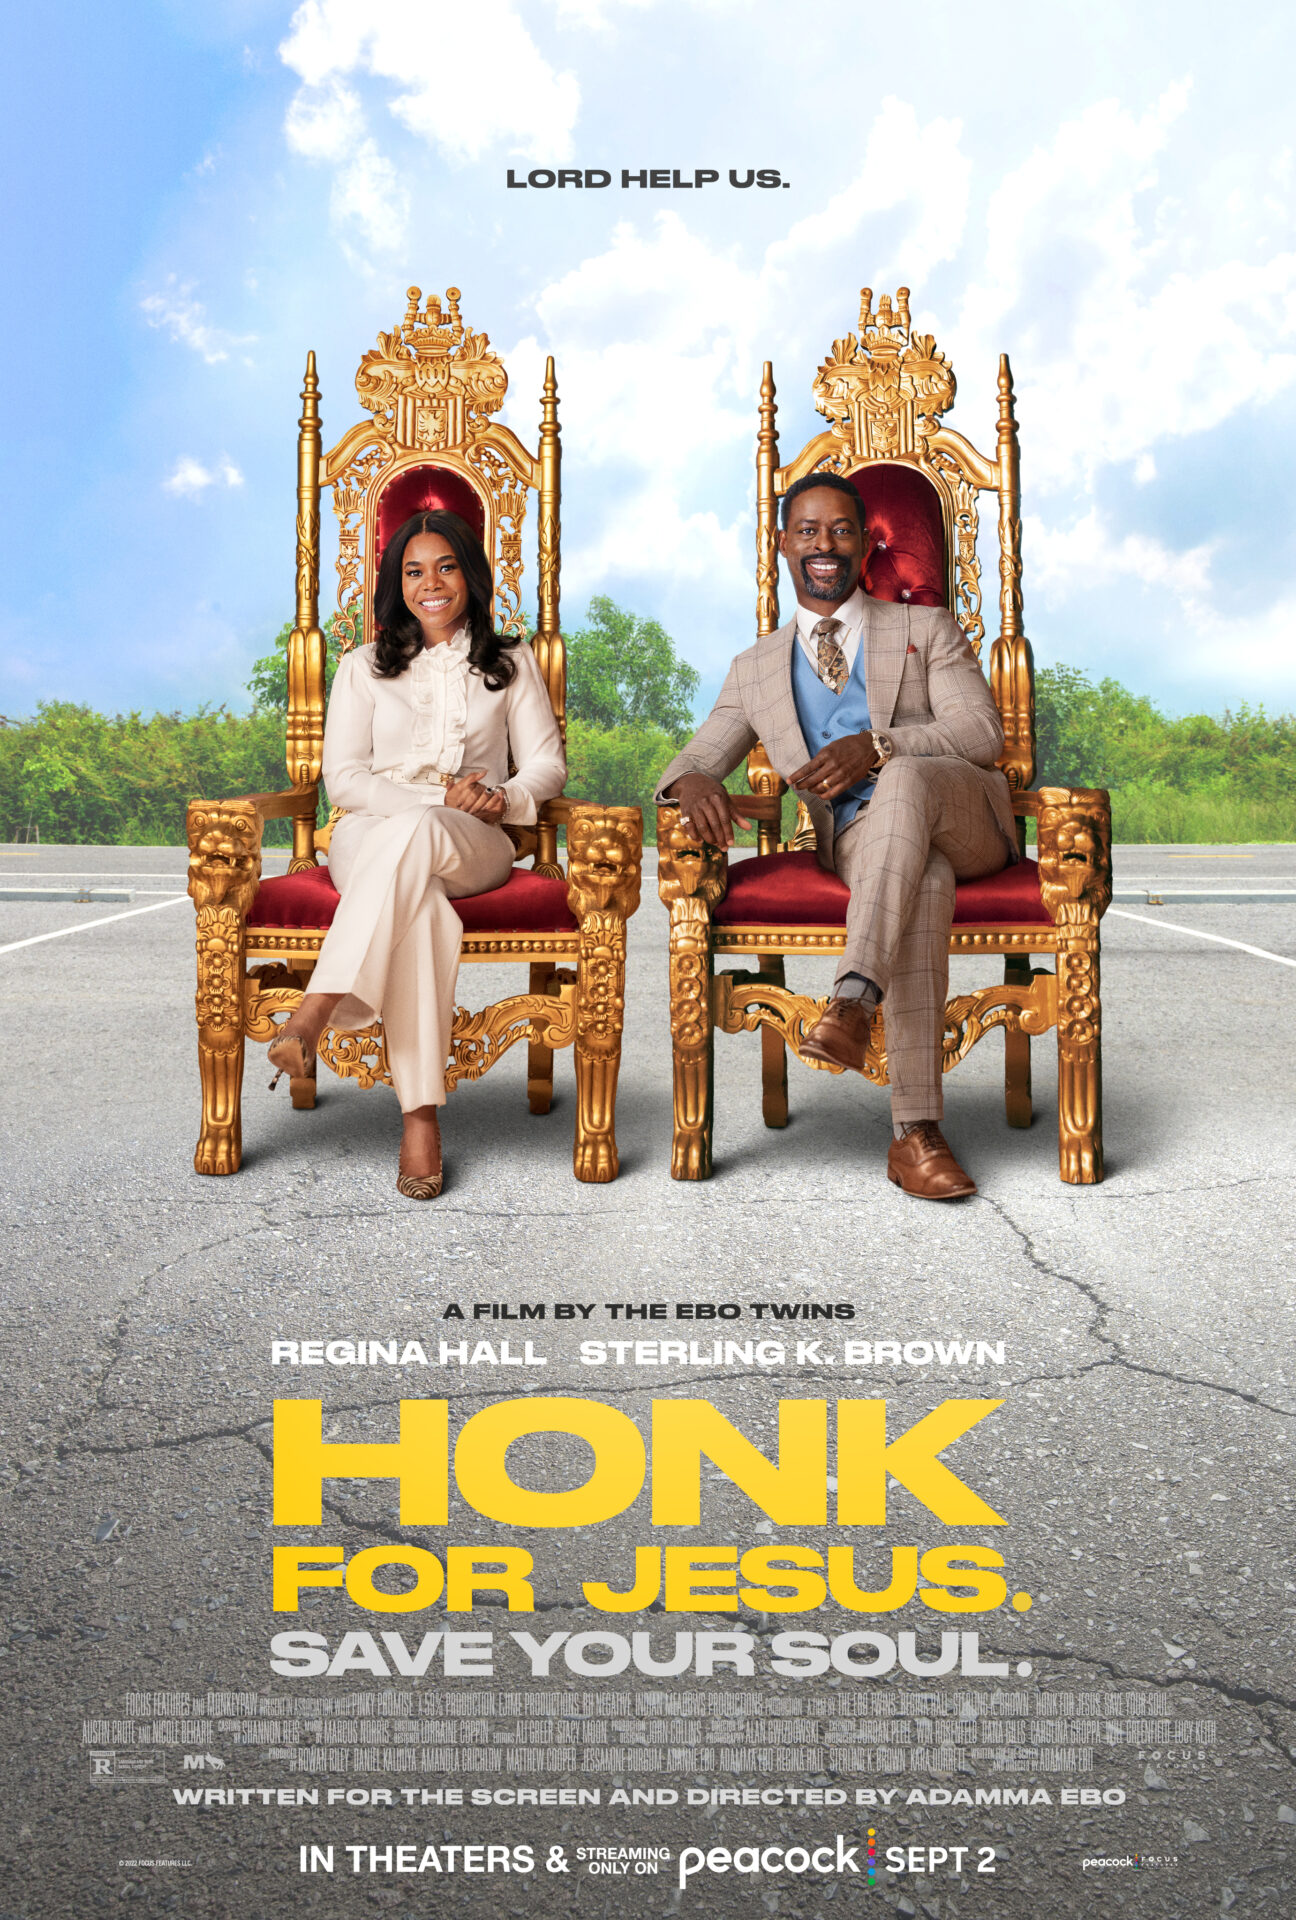 HONK FOR JESUS. SAVE YOUR SOUL. - Movieguide